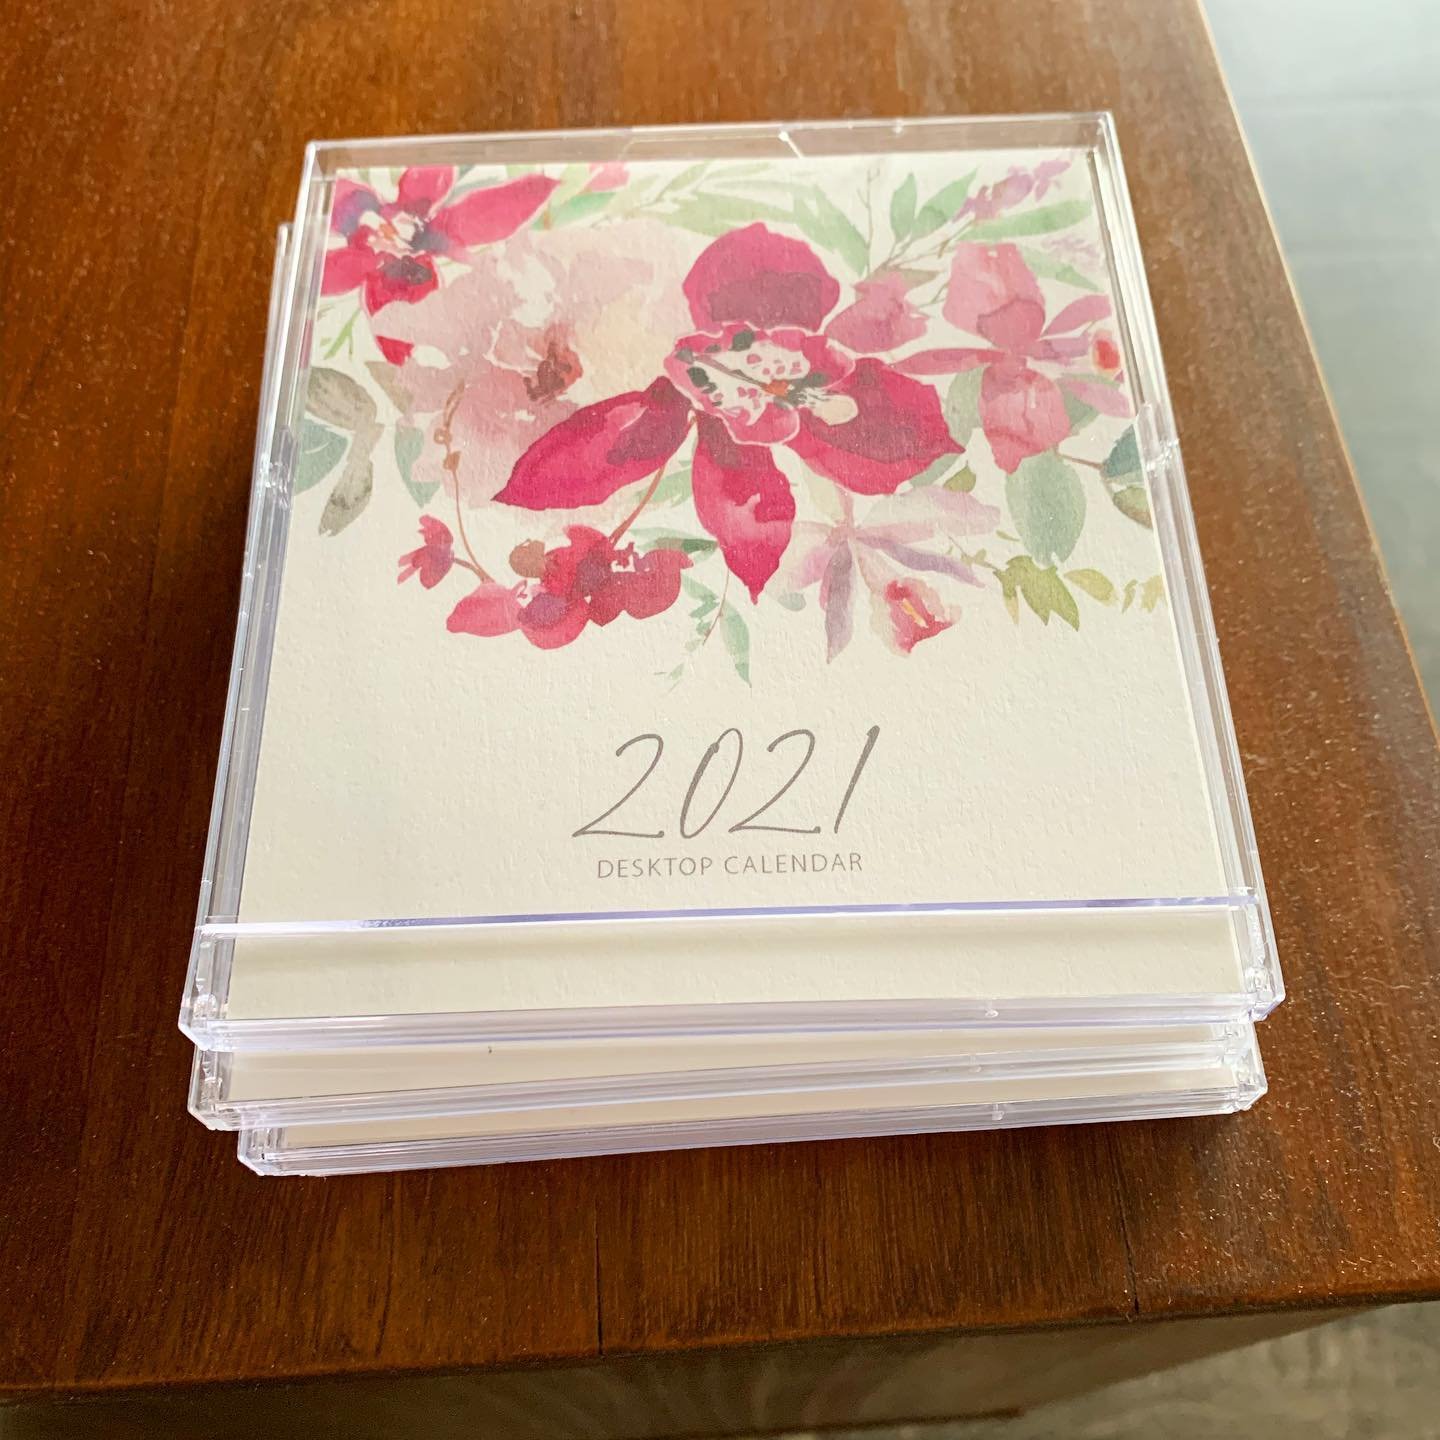 2 weeks left of 2020, y&rsquo;all. Don&rsquo;t forget to get your cali&rsquo;s!

#goodbye2020 #fuck2020 #calendars #desktopcalendar #floralcalendar #2021calendar